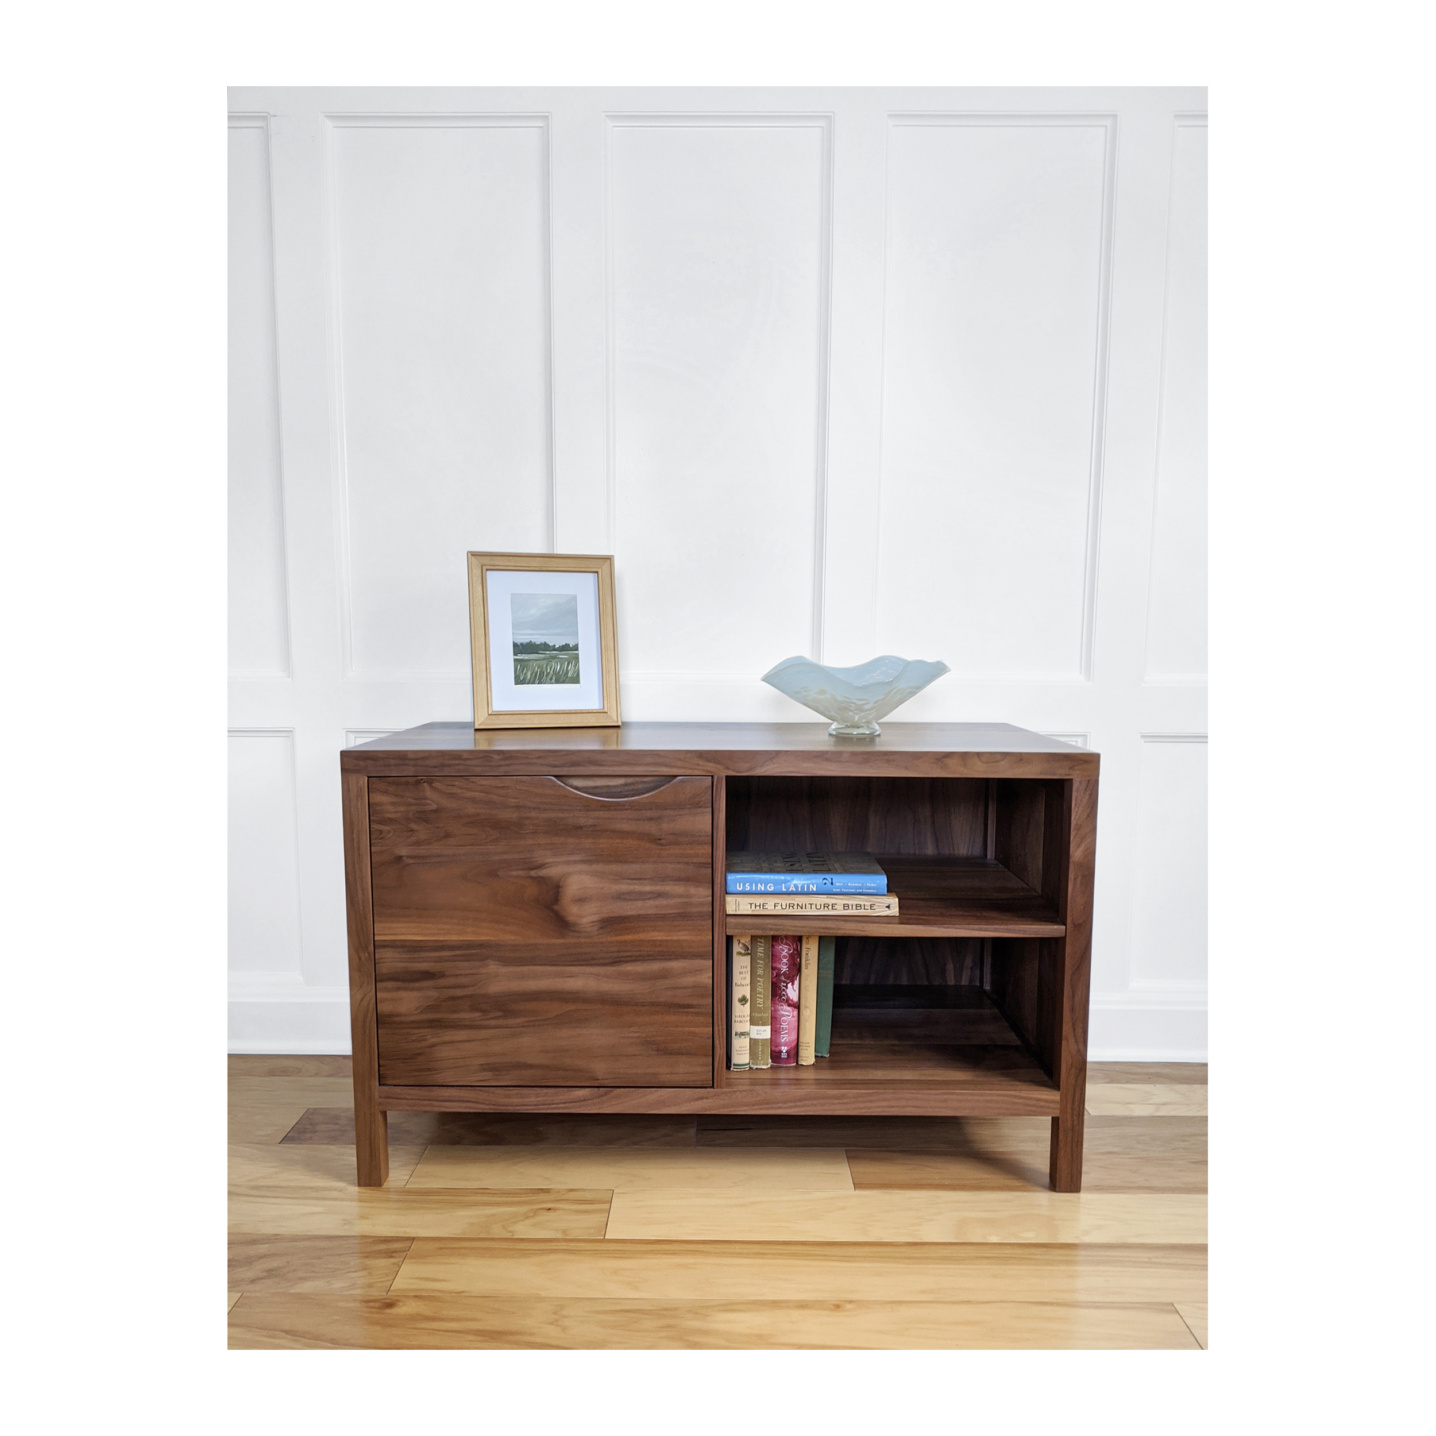 Solid walnut small media console with one door at 42 inches